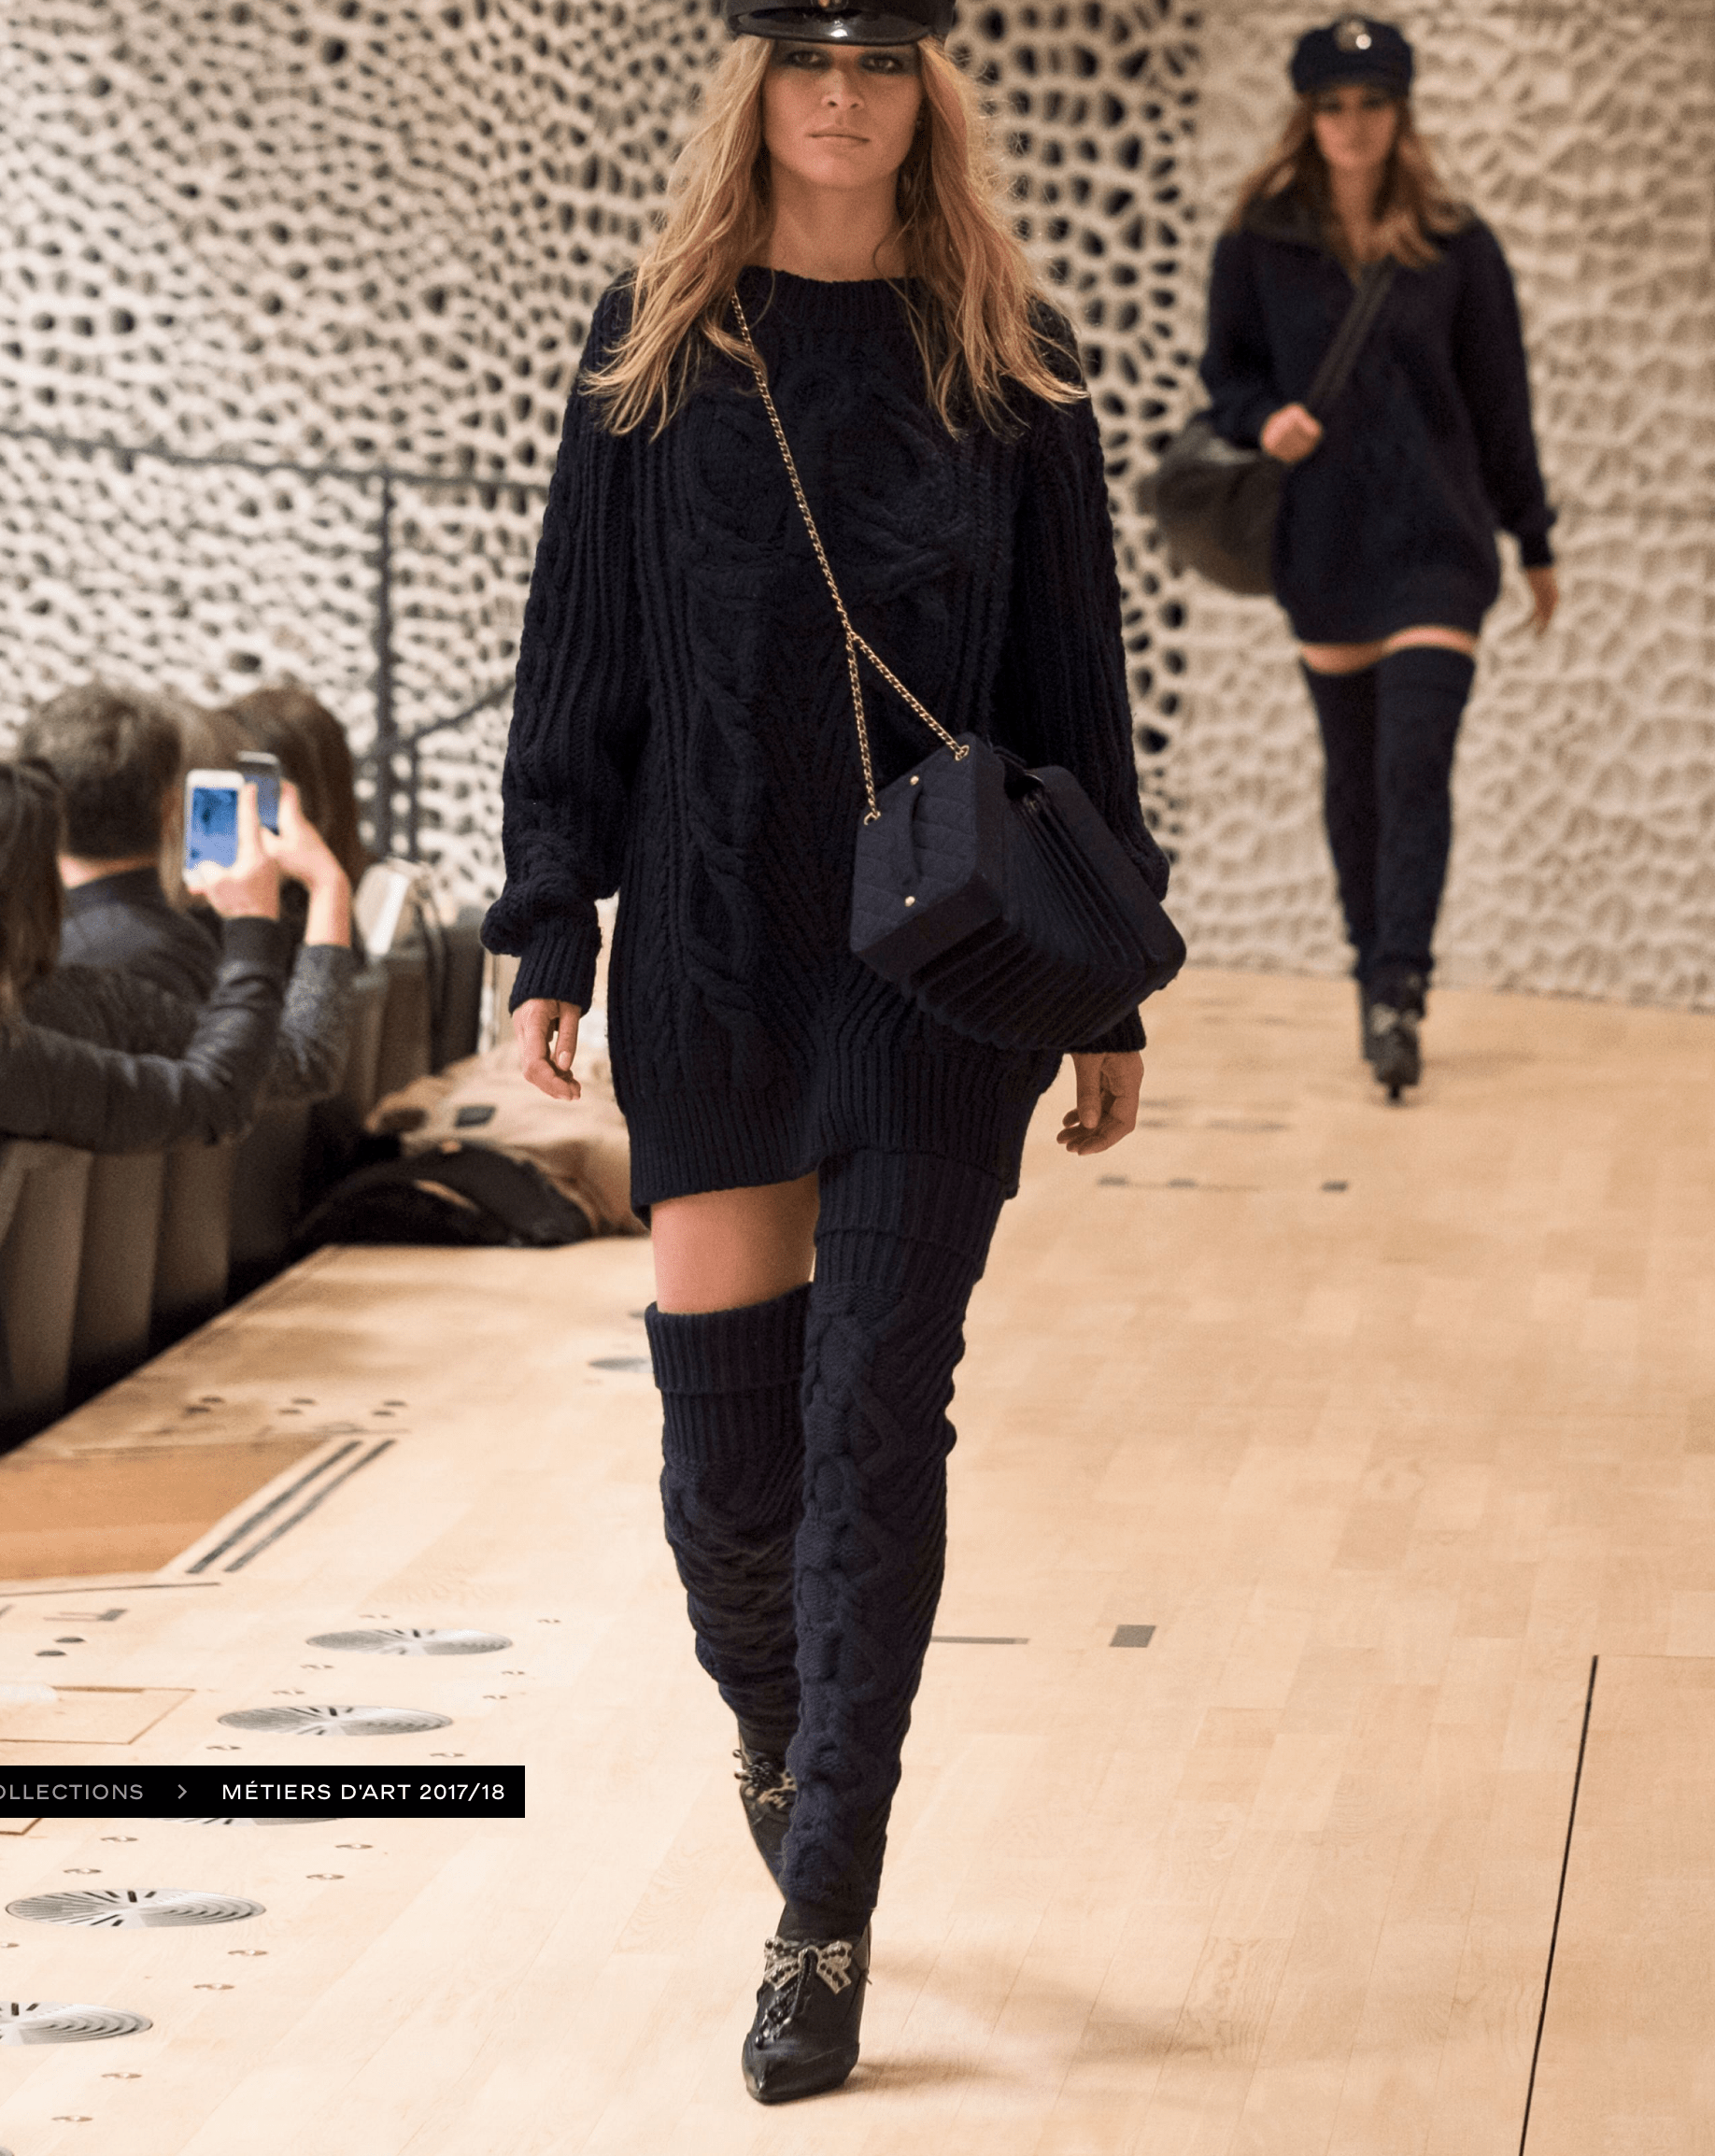 Chanel Metiers D'Art 17/18 Show In Hamburg: What To Own